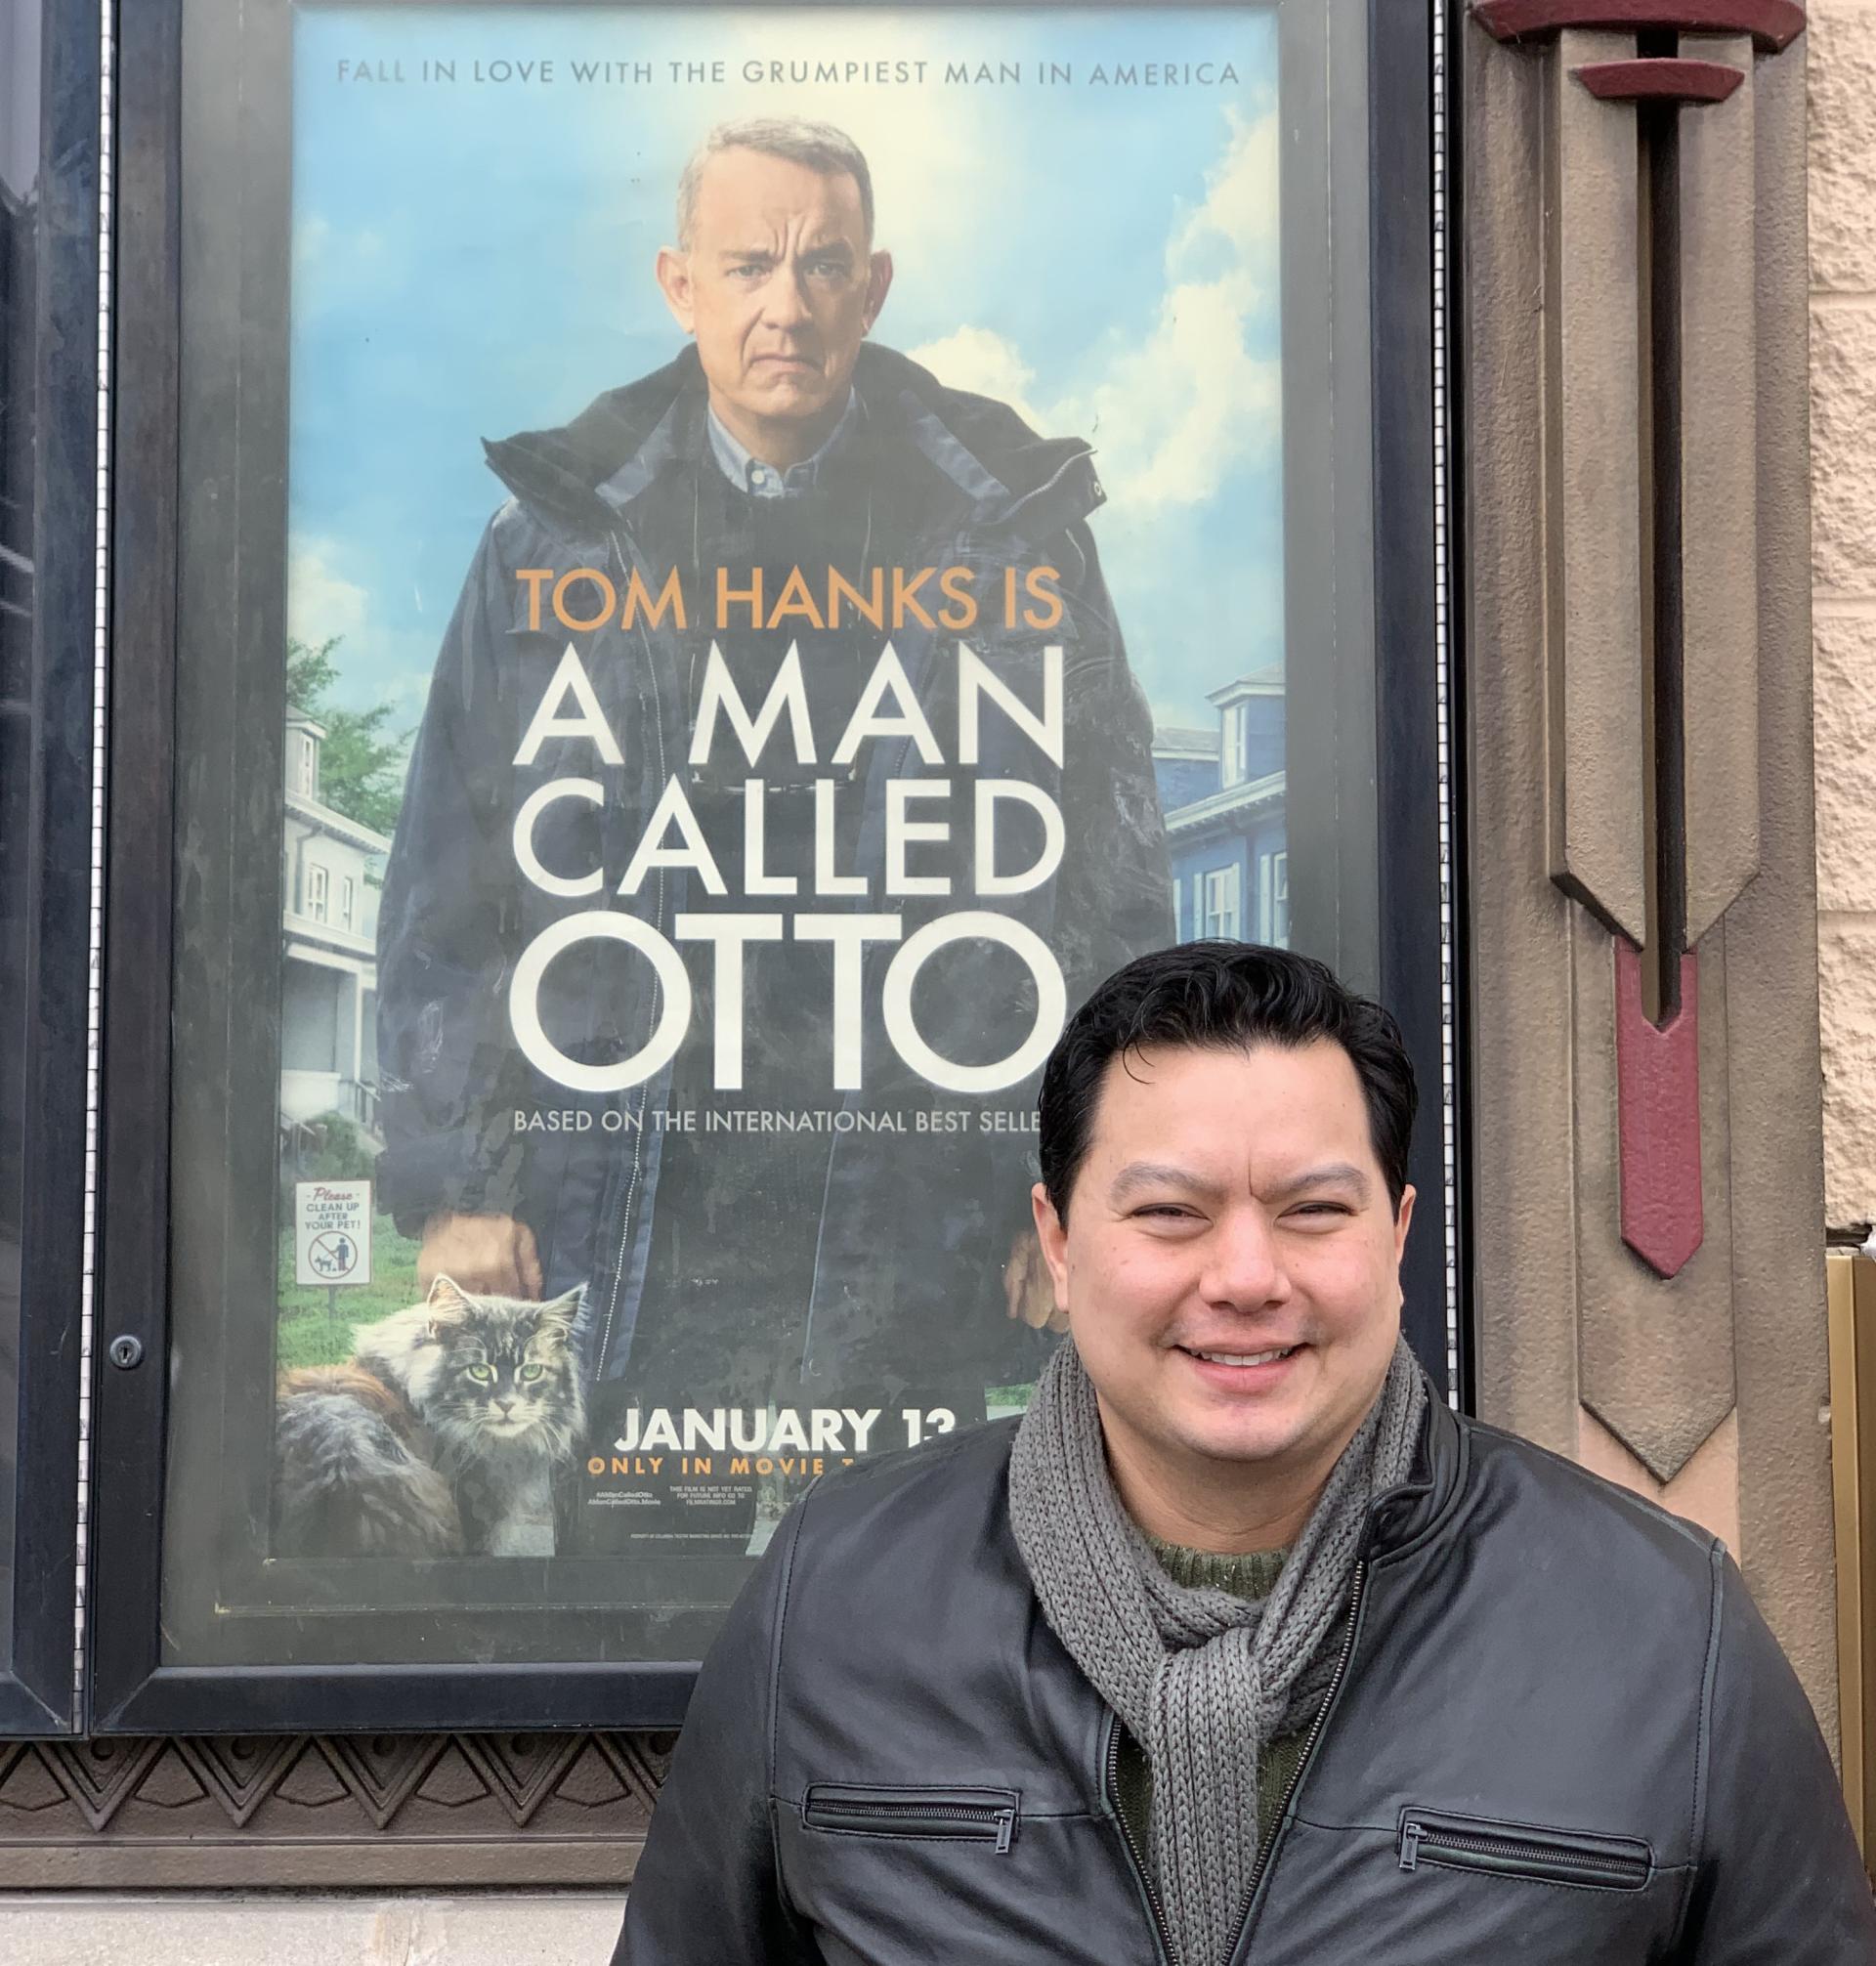 North Central College alumnus Peter Sipla poses in front of the poster for the movie "A Man Called Otto."